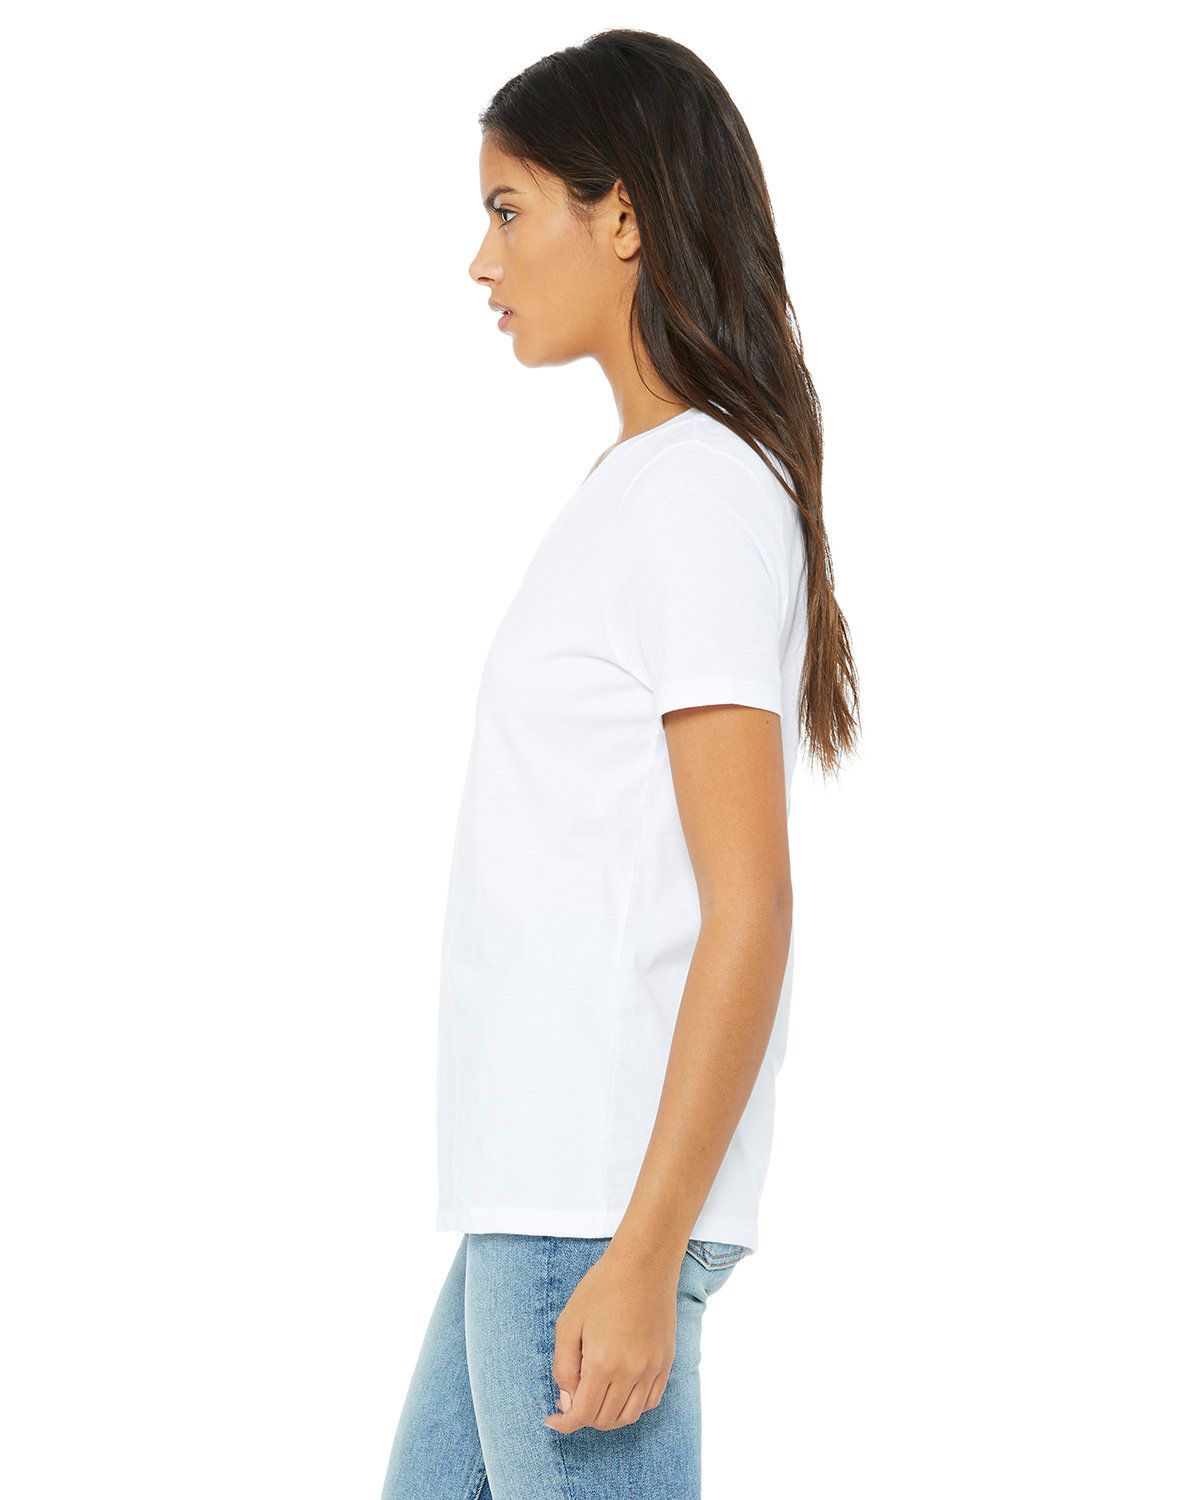 Bella + Canvas 6405 Women's Relaxed Jersey Short Sleeve V-Neck Tee - R